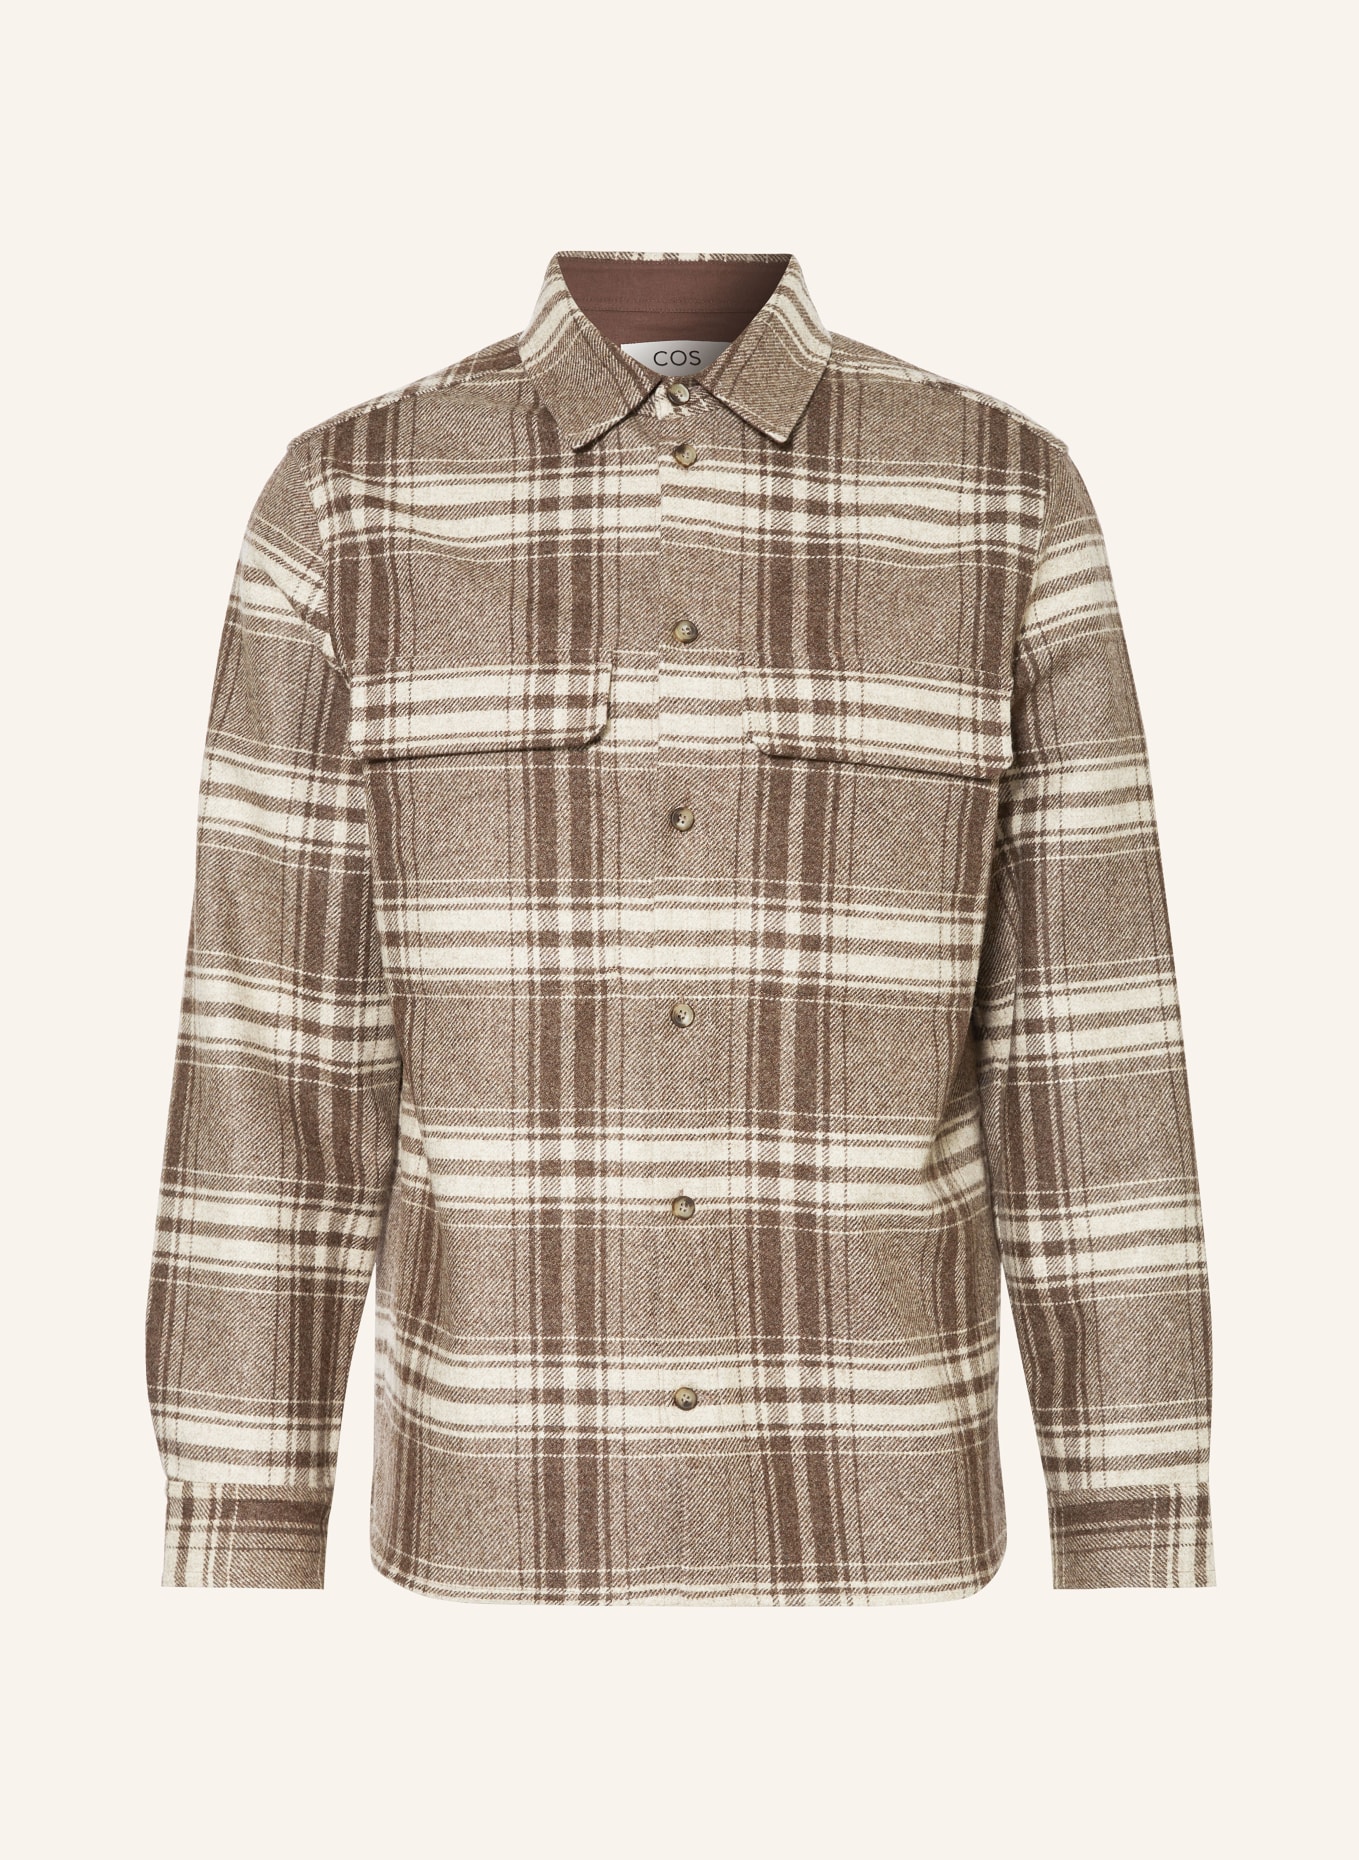 COS Flannel shirt relaxed fit, Color: BEIGE/ BROWN/ DARK BROWN (Image 1)